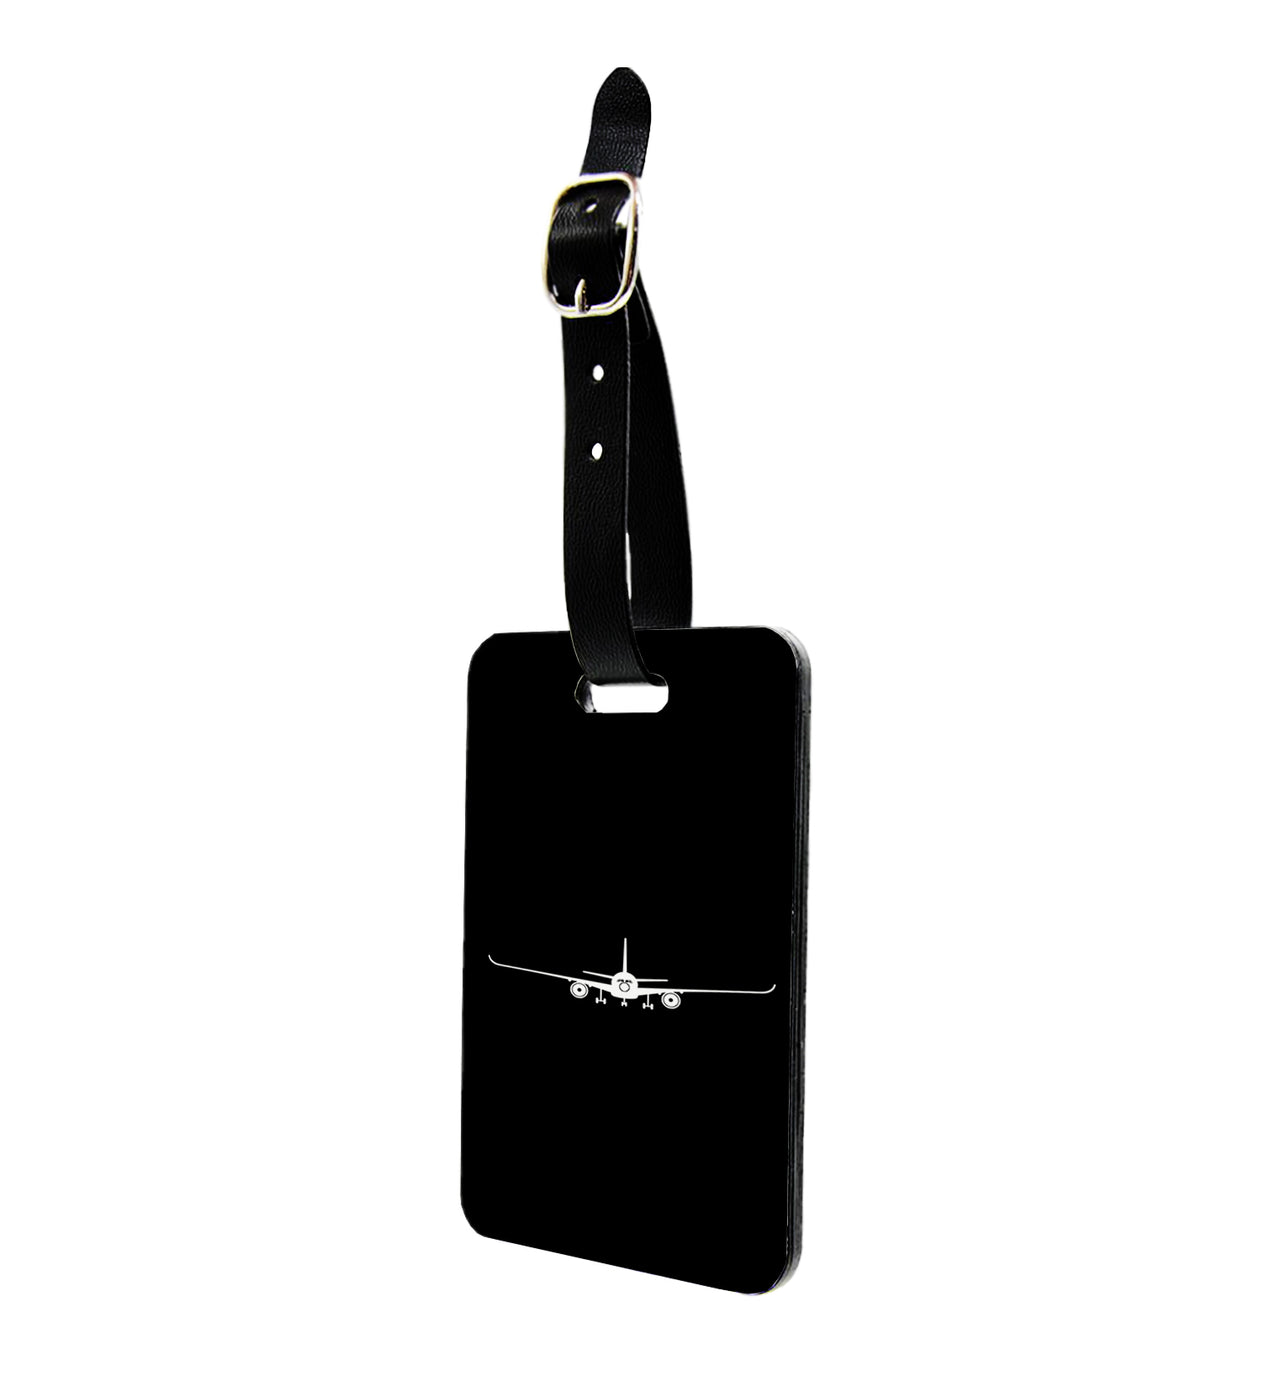 Airbus A350 Silhouette Designed Luggage Tag